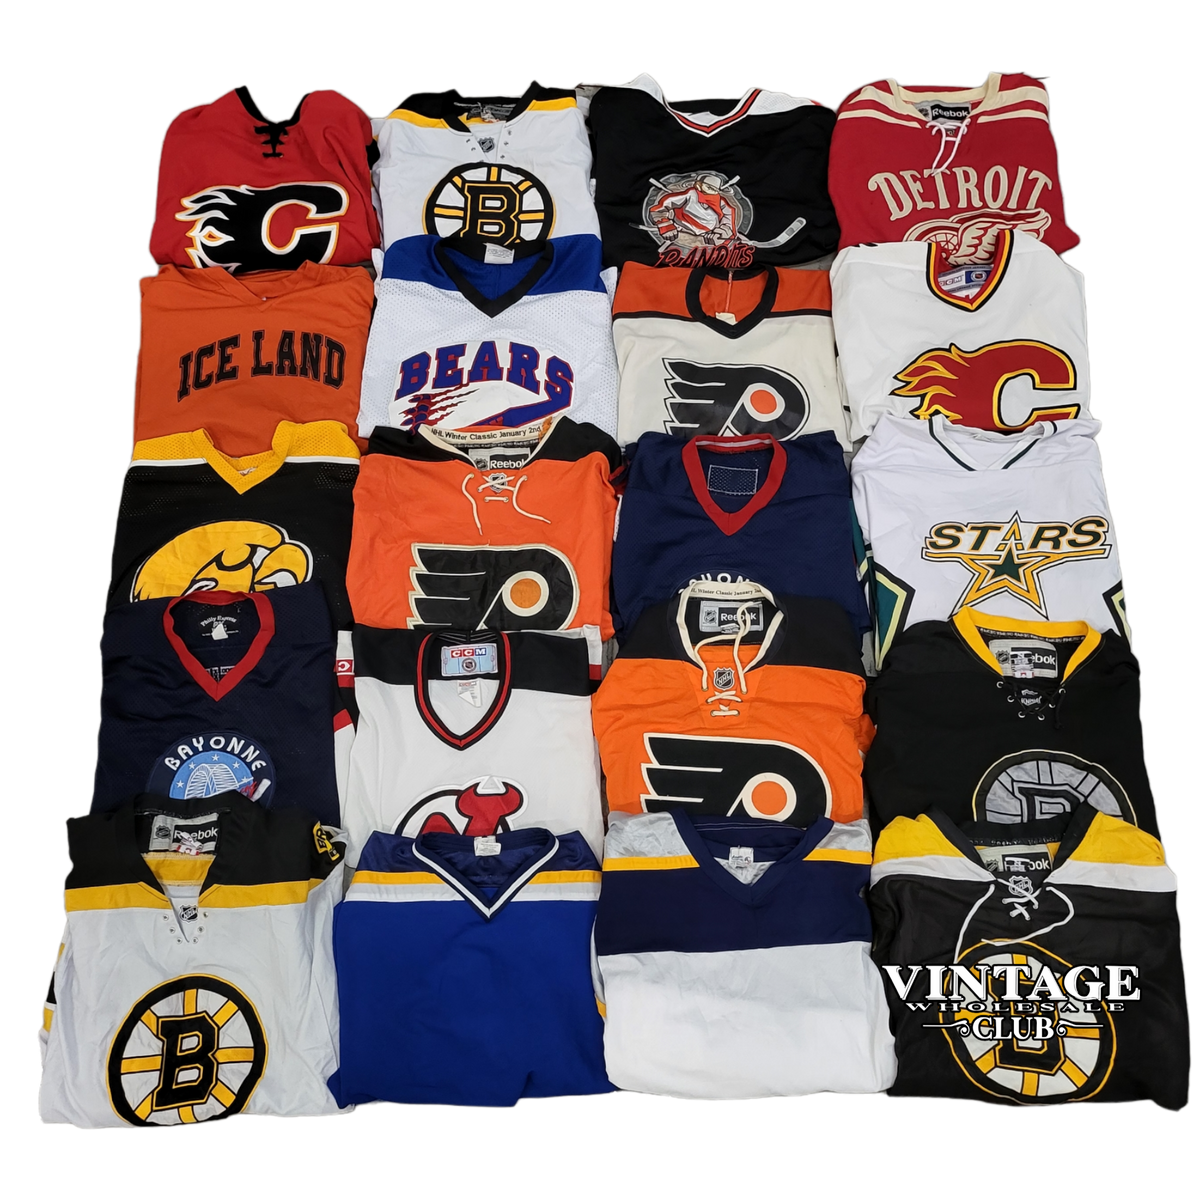 NHL Jerseys for sale in Olean, New York